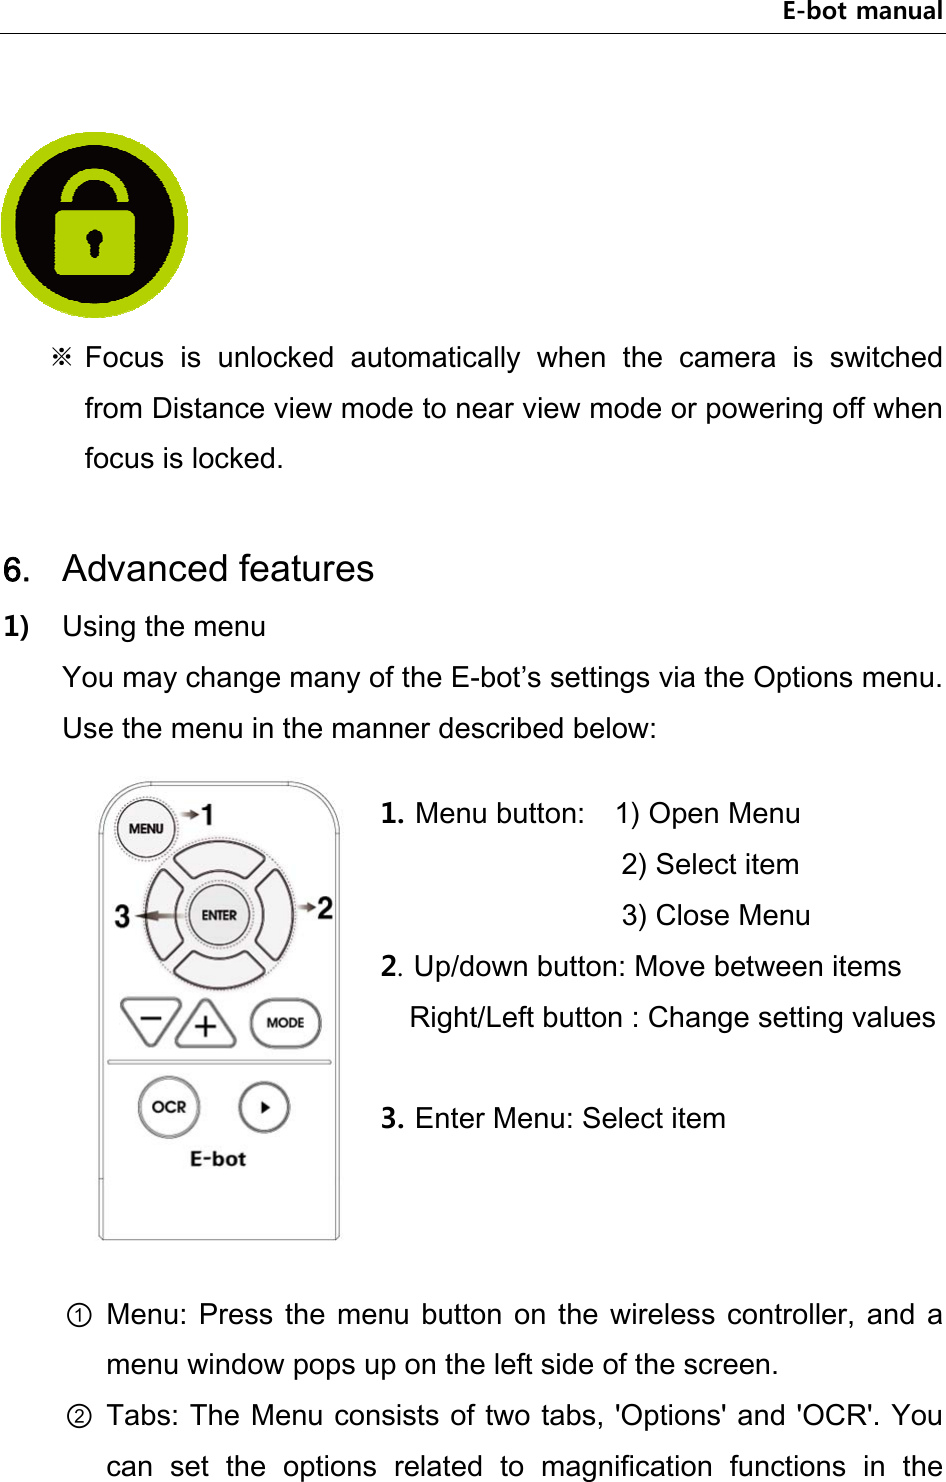 E-bot manual      ※ Focus  is  unlocked  automatically  when  the  camera  is  switched from Distance view mode to near view mode or powering off when focus is locked.  6. Advanced features 1) Using the menu You may change many of the E-bot’s settings via the Options menu. Use the menu in the manner described below:     ① Menu: Press the menu  button  on  the  wireless  controller,  and  a menu window pops up on the left side of the screen. ② Tabs: The Menu consists of two tabs, &apos;Options&apos; and &apos;OCR&apos;. You can  set  the  options  related  to  magnification  functions  in  the 1. Menu button:    1) Open Menu             2) Select item             3) Close Menu 2. Up/down button: Move between items Right/Left button : Change setting values  3. Enter Menu: Select item 